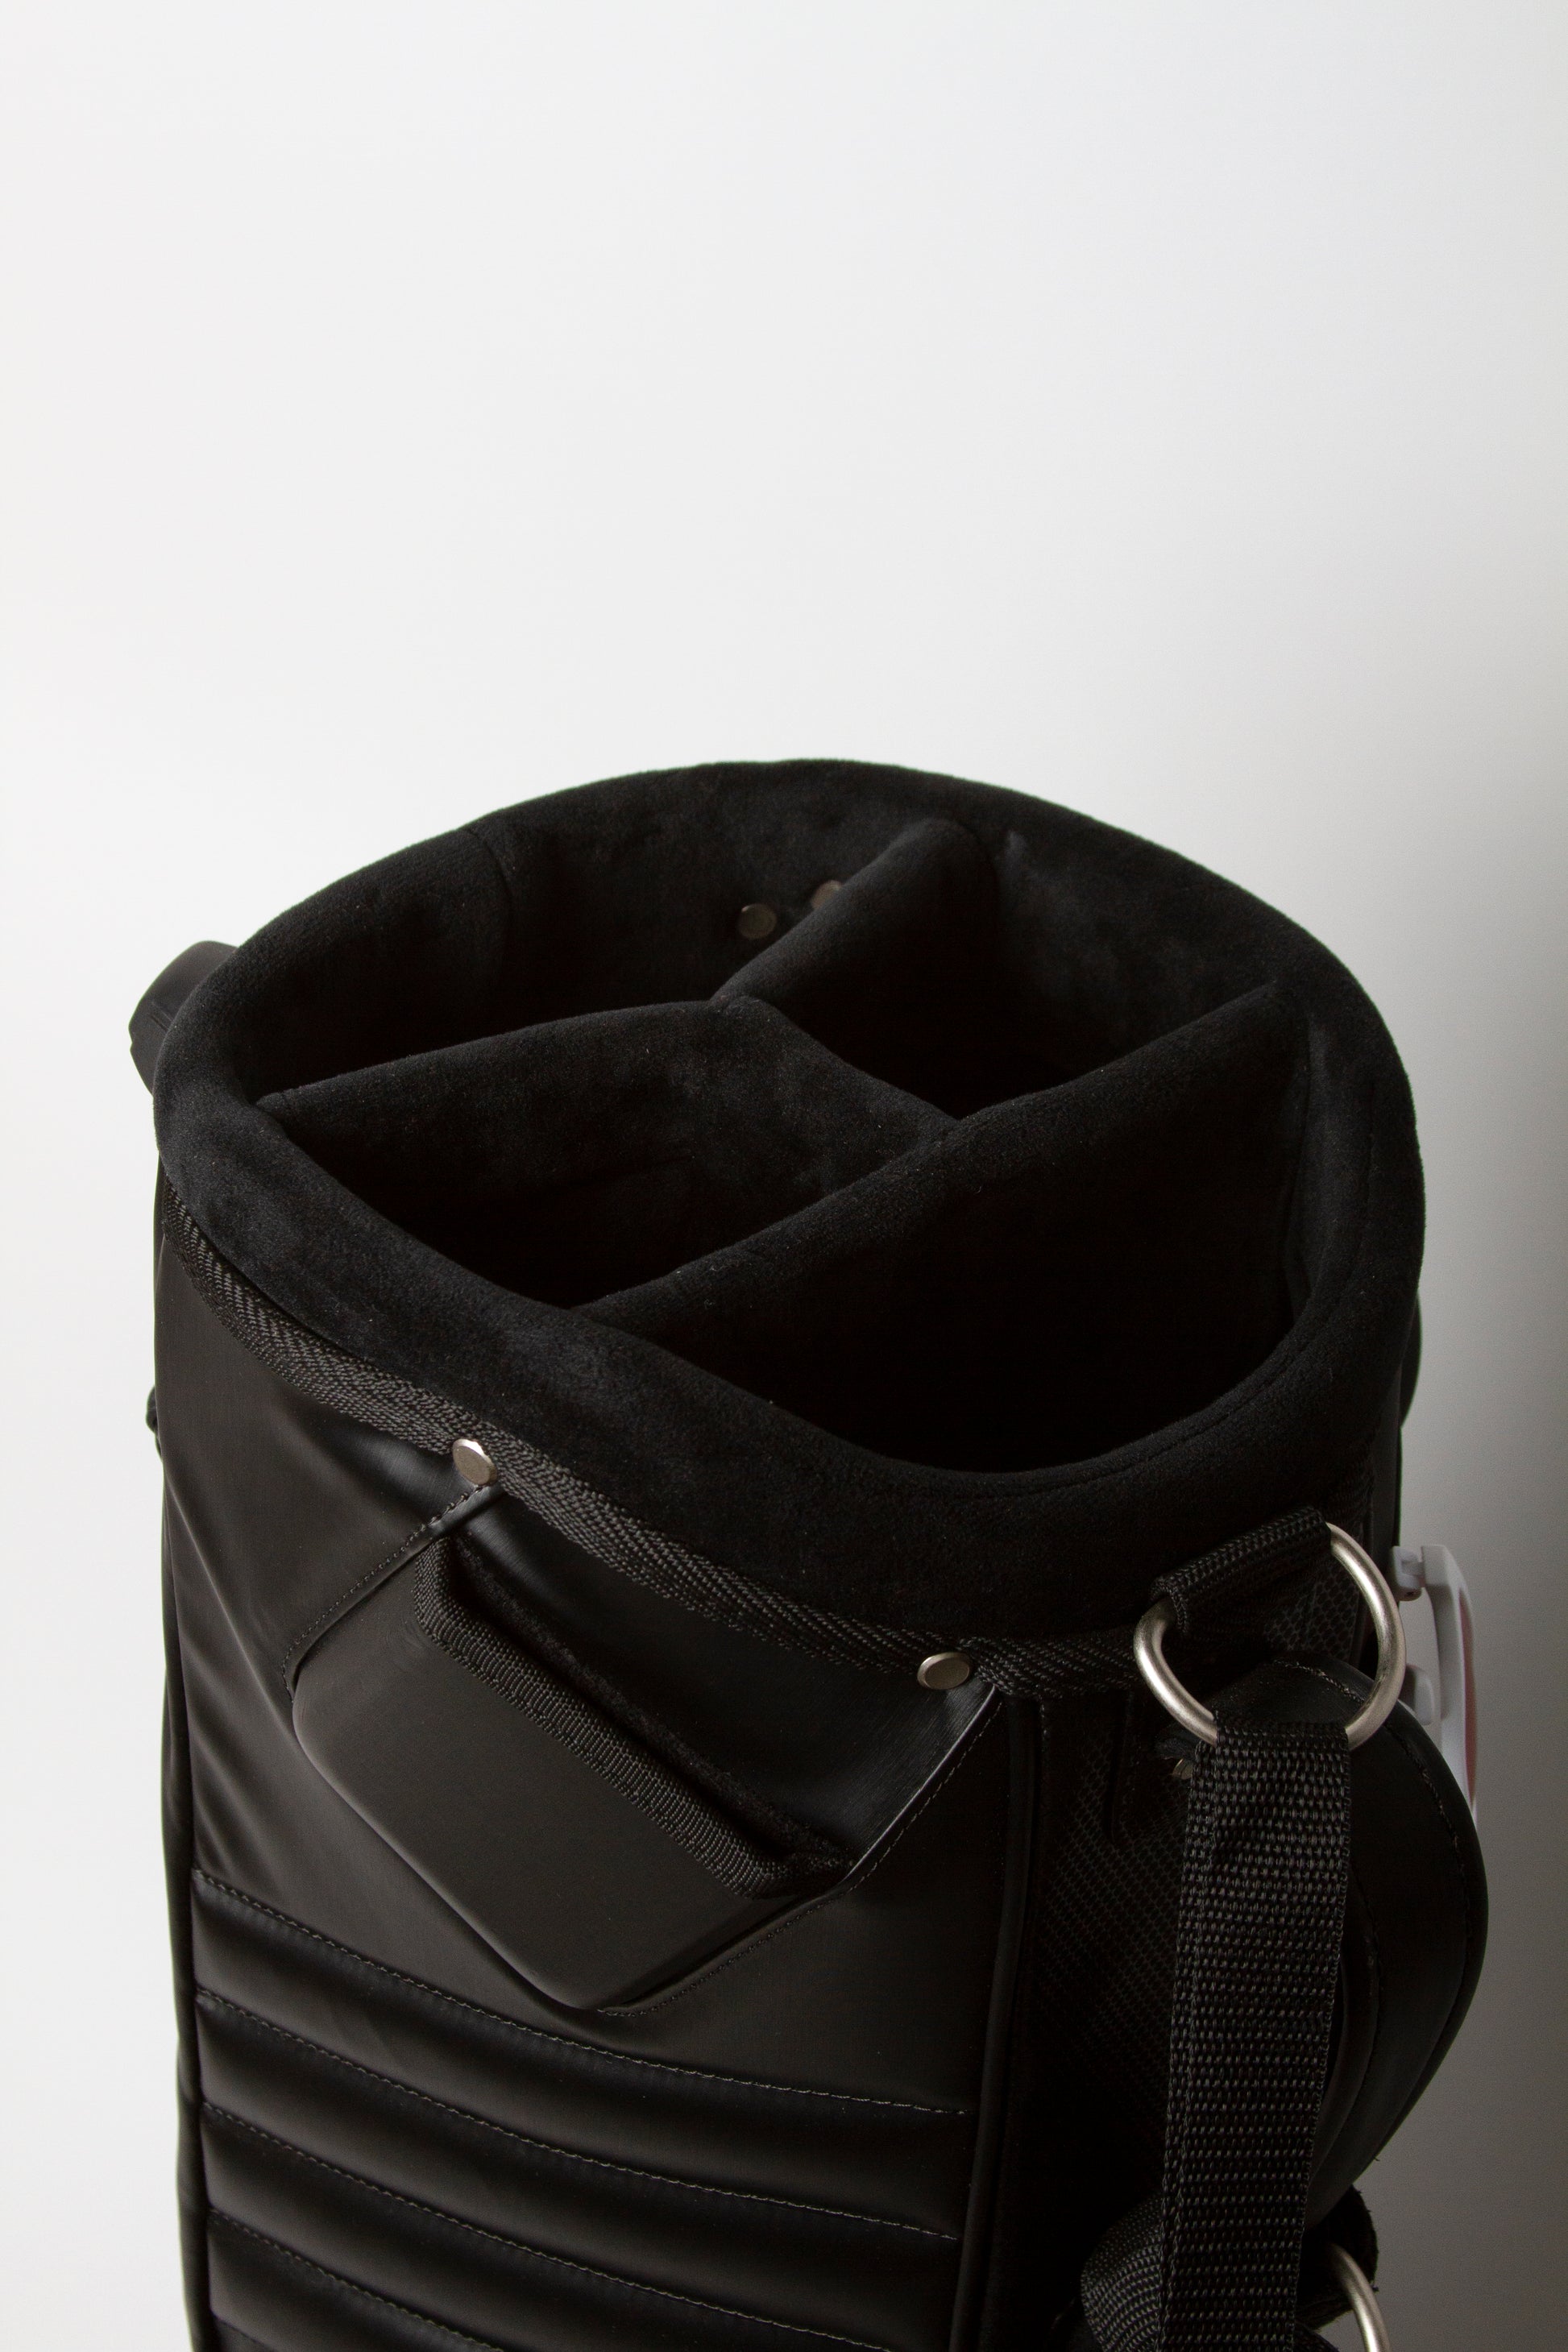 MNML GOLF's MV2 golf bag is made from premium microsuede and features a  5 -way divider.